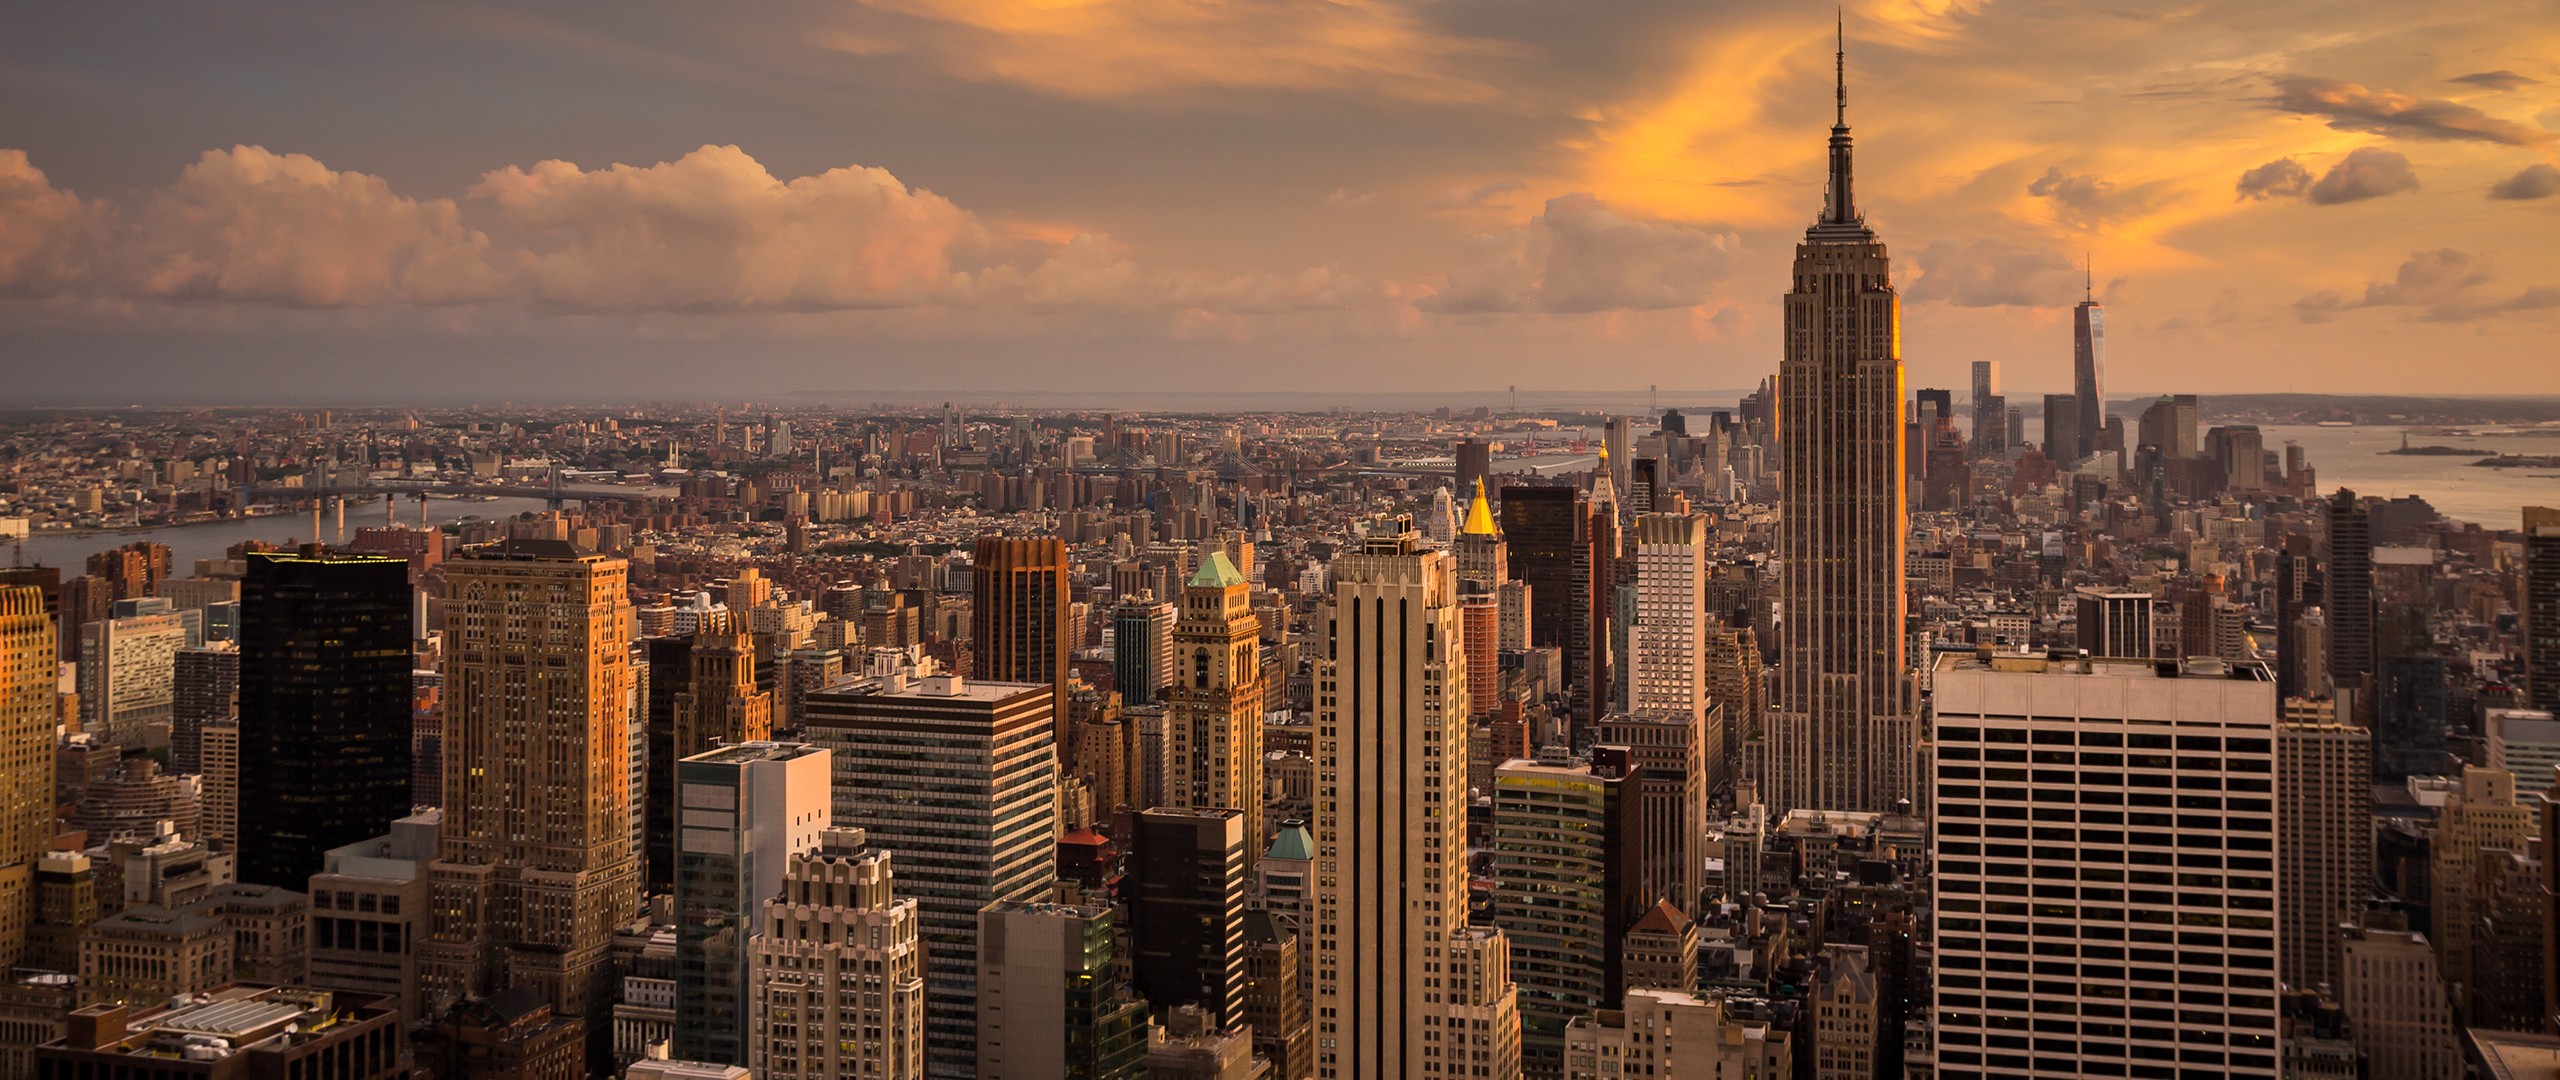 General 2560x1080 New York City Manhattan morning Empire State Building city clouds cityscape USA